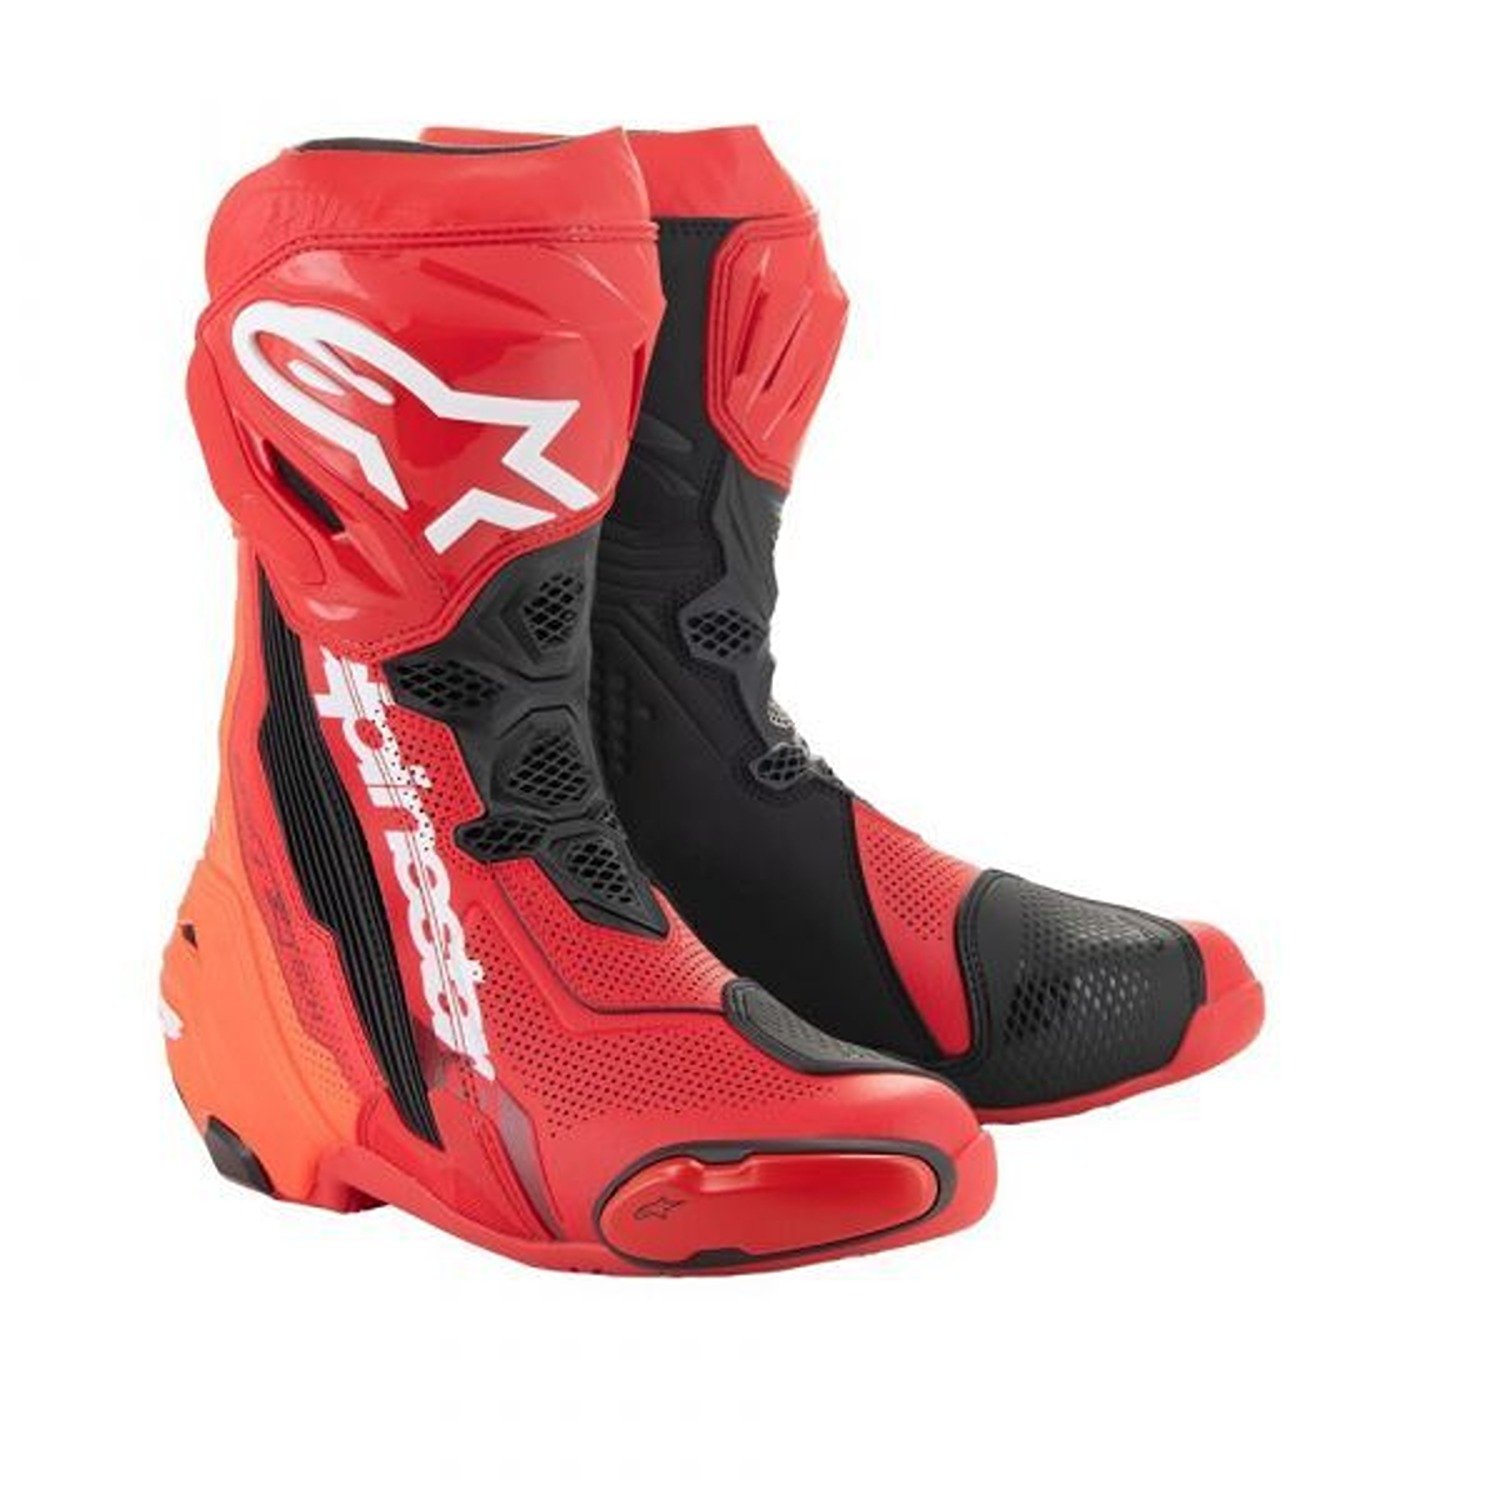 Image of Alpinestars Supertech R Vented Boots Bright Red Red Fluo Talla 46